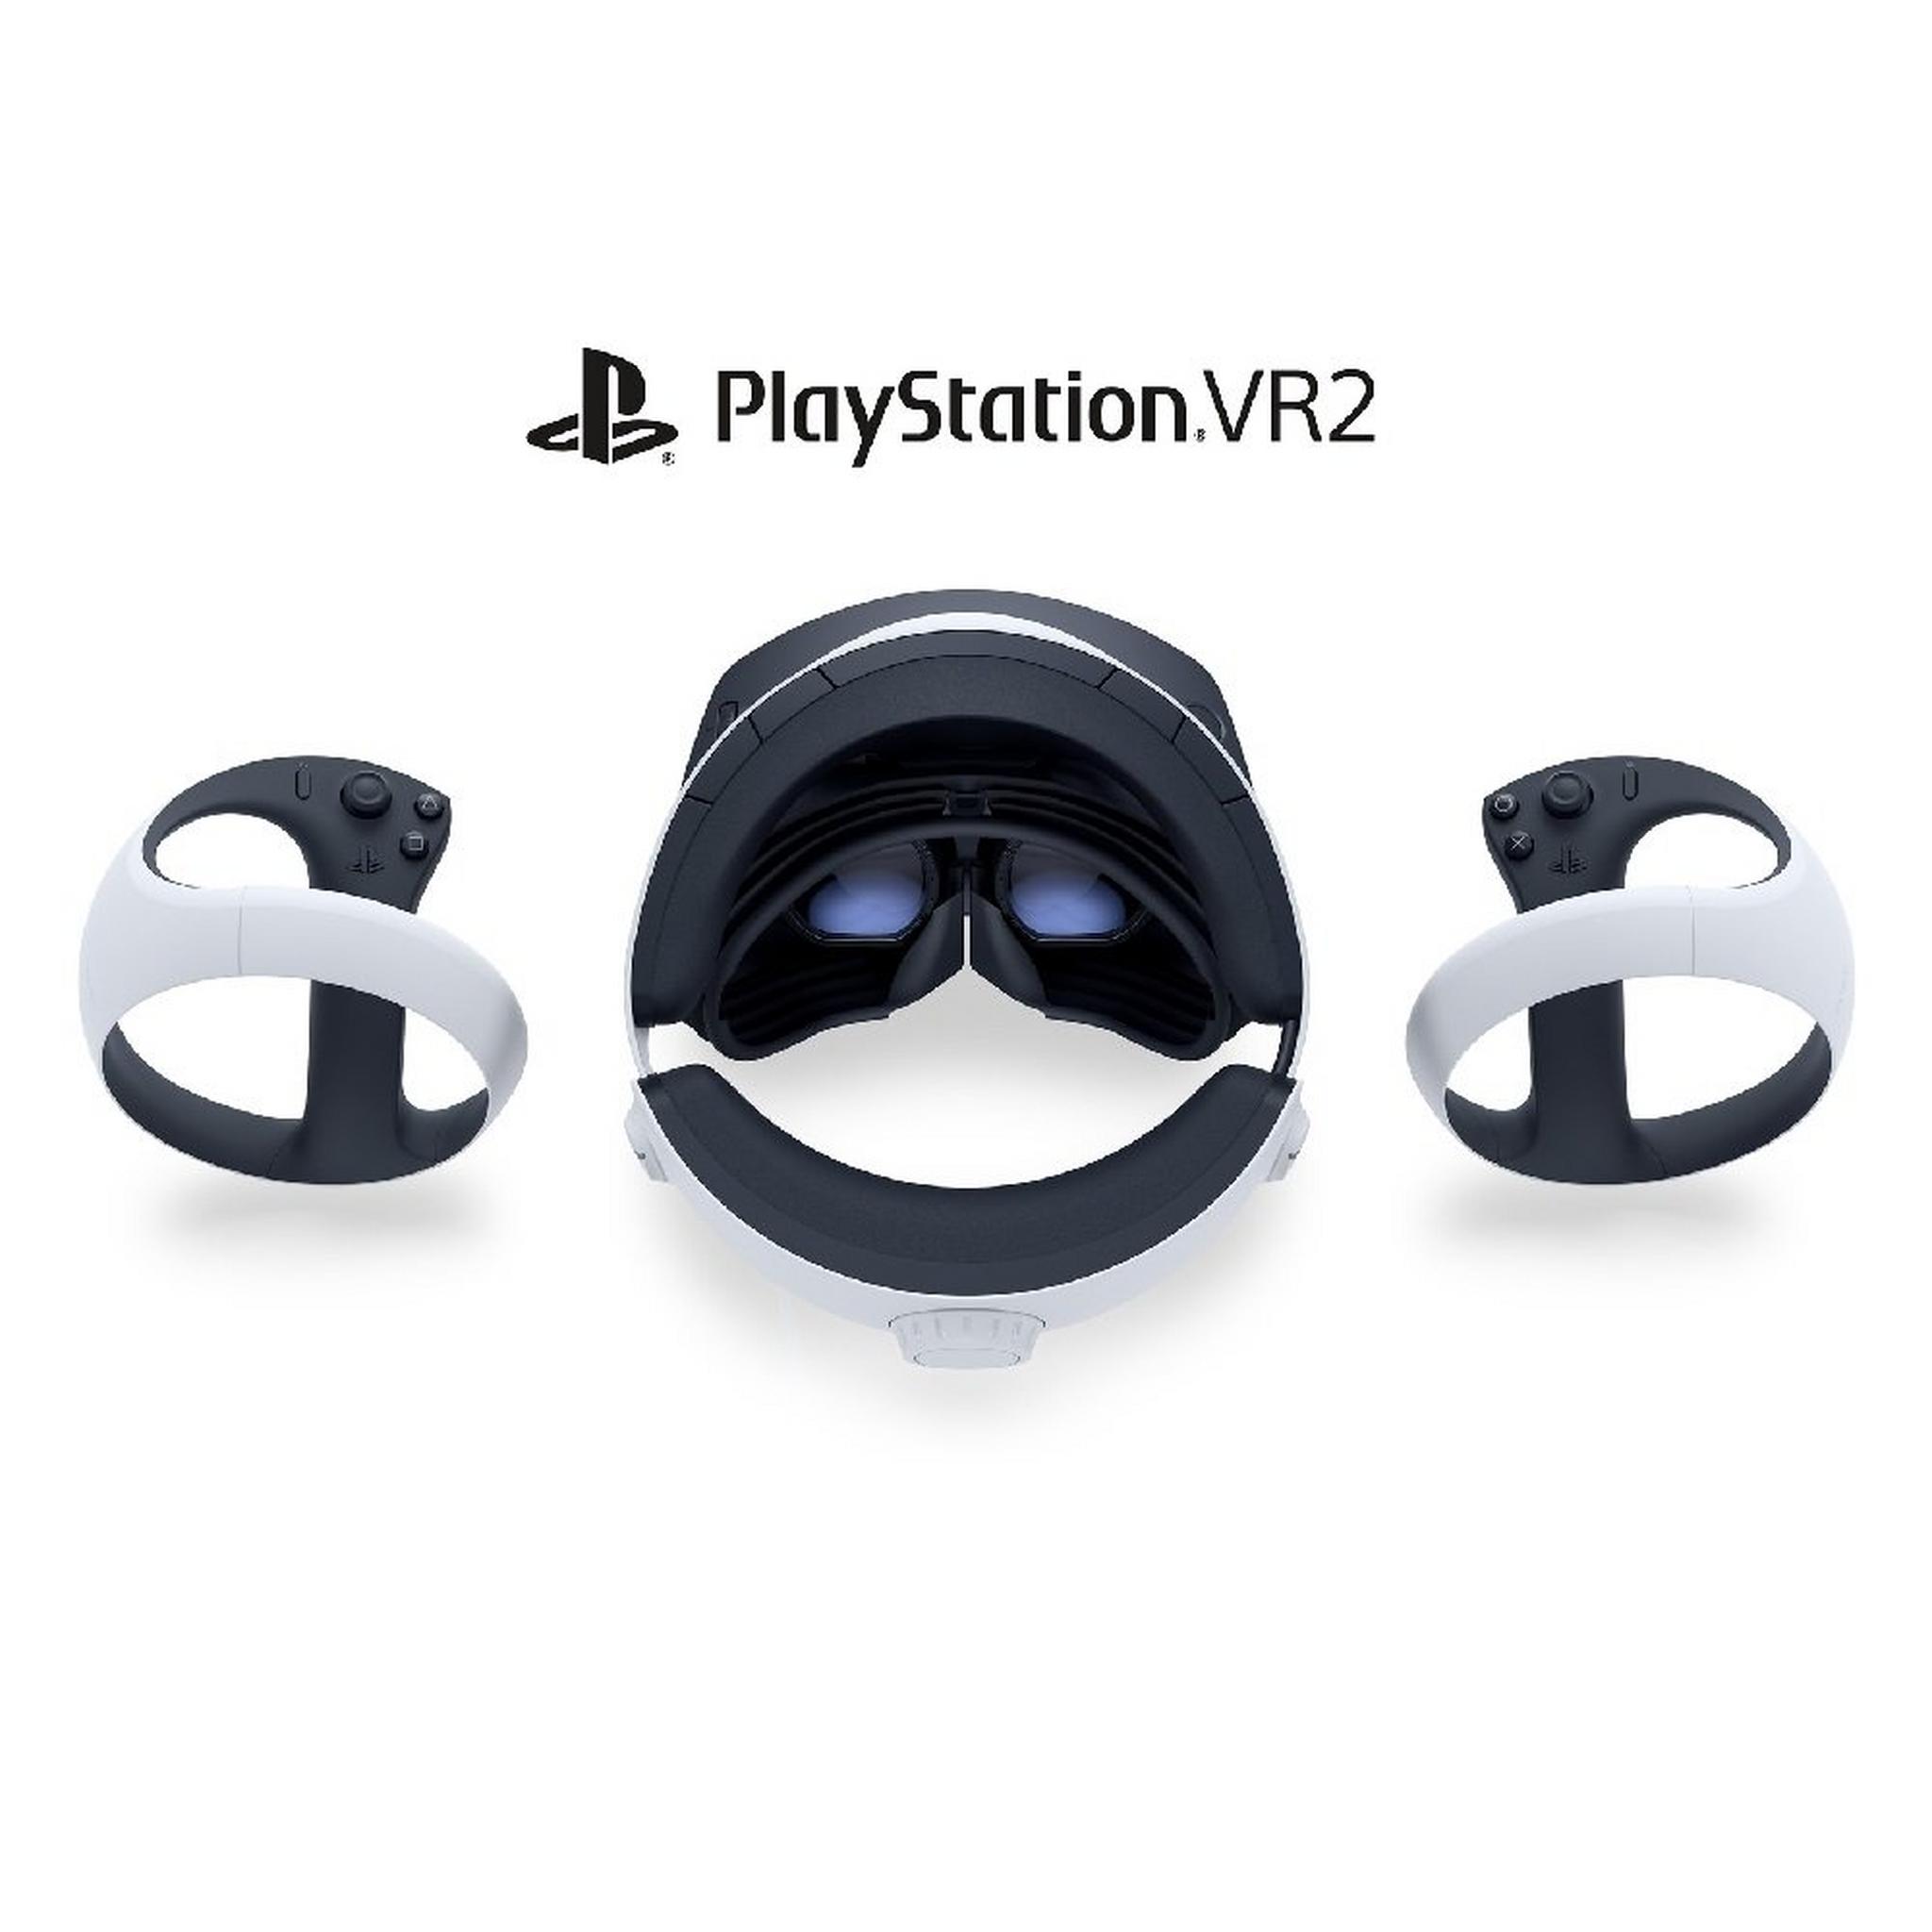 Pre-Order Now PlayStation VR2 Standalone